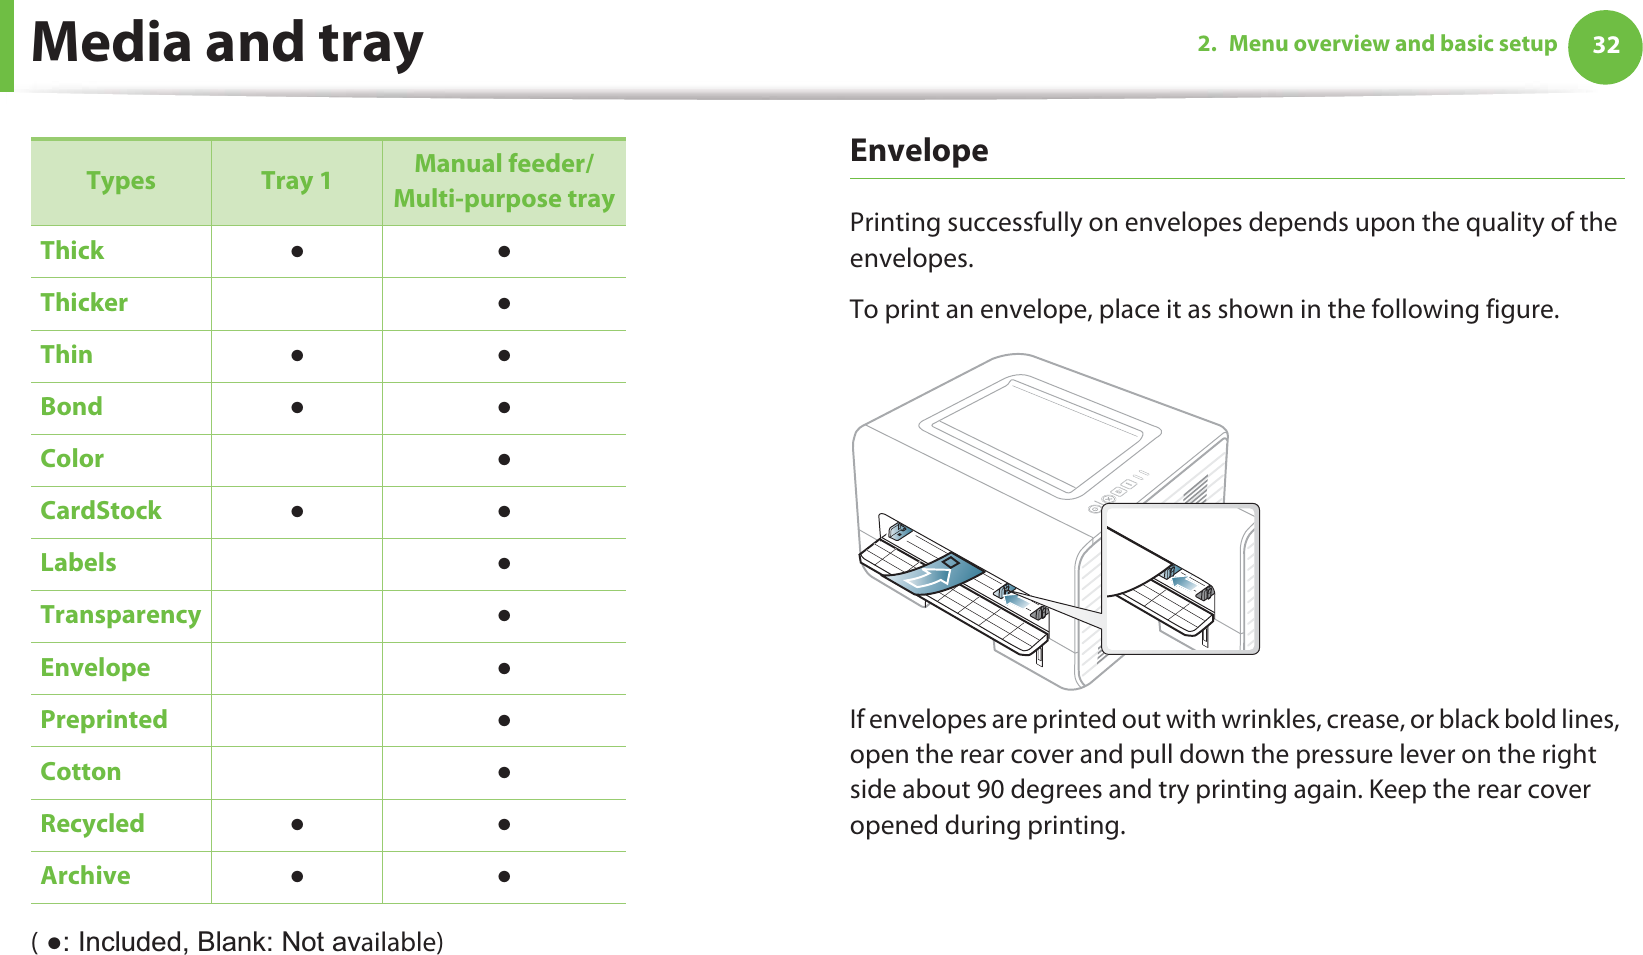 Media and tray 322. Menu overview and basic setup( Ɣ: Included, Blank: Not available) EnvelopePrinting successfully on envelopes depends upon the quality of the envelopes. To print an envelope, place it as shown in the following figure.If envelopes are printed out with wrinkles, crease, or black bold lines, open the rear cover and pull down the pressure lever on the right side about 90 degrees and try printing again. Keep the rear cover opened during printing. Thick  ƔƔThicker  ƔThin  ƔƔBond ƔƔColor  ƔCardStock ƔƔLabels ƔTransparency ƔEnvelope ƔPreprinted  ƔCotton ƔRecycled ƔƔArchive ƔƔTypes Tray 1 Manual feeder/Multi-purpose tray